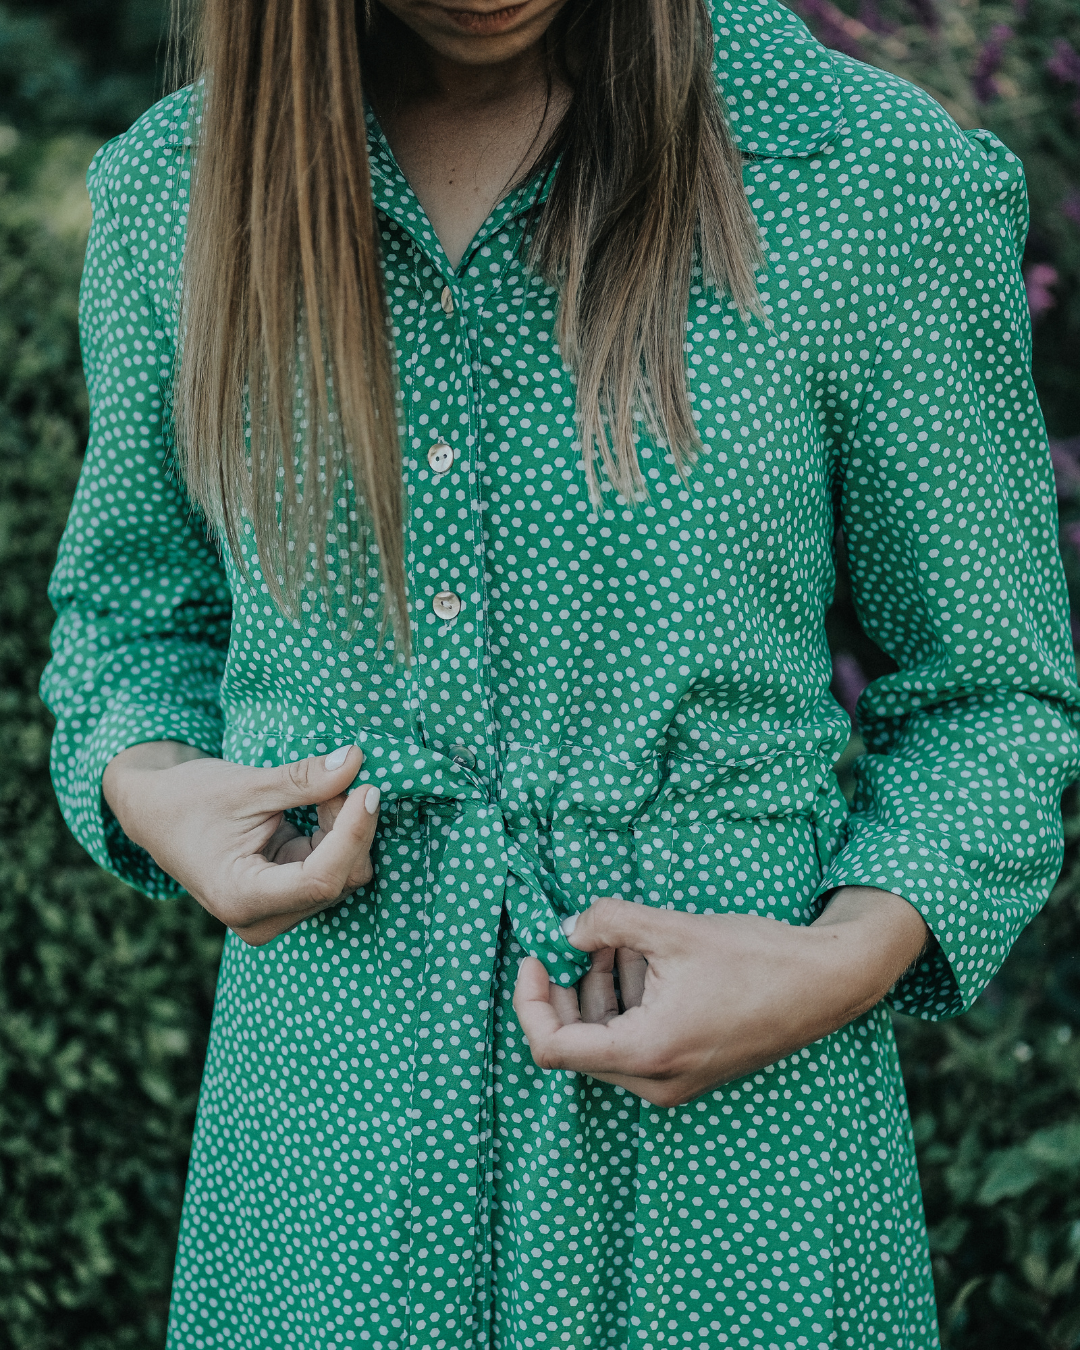 Green Spotted Button-through Dress